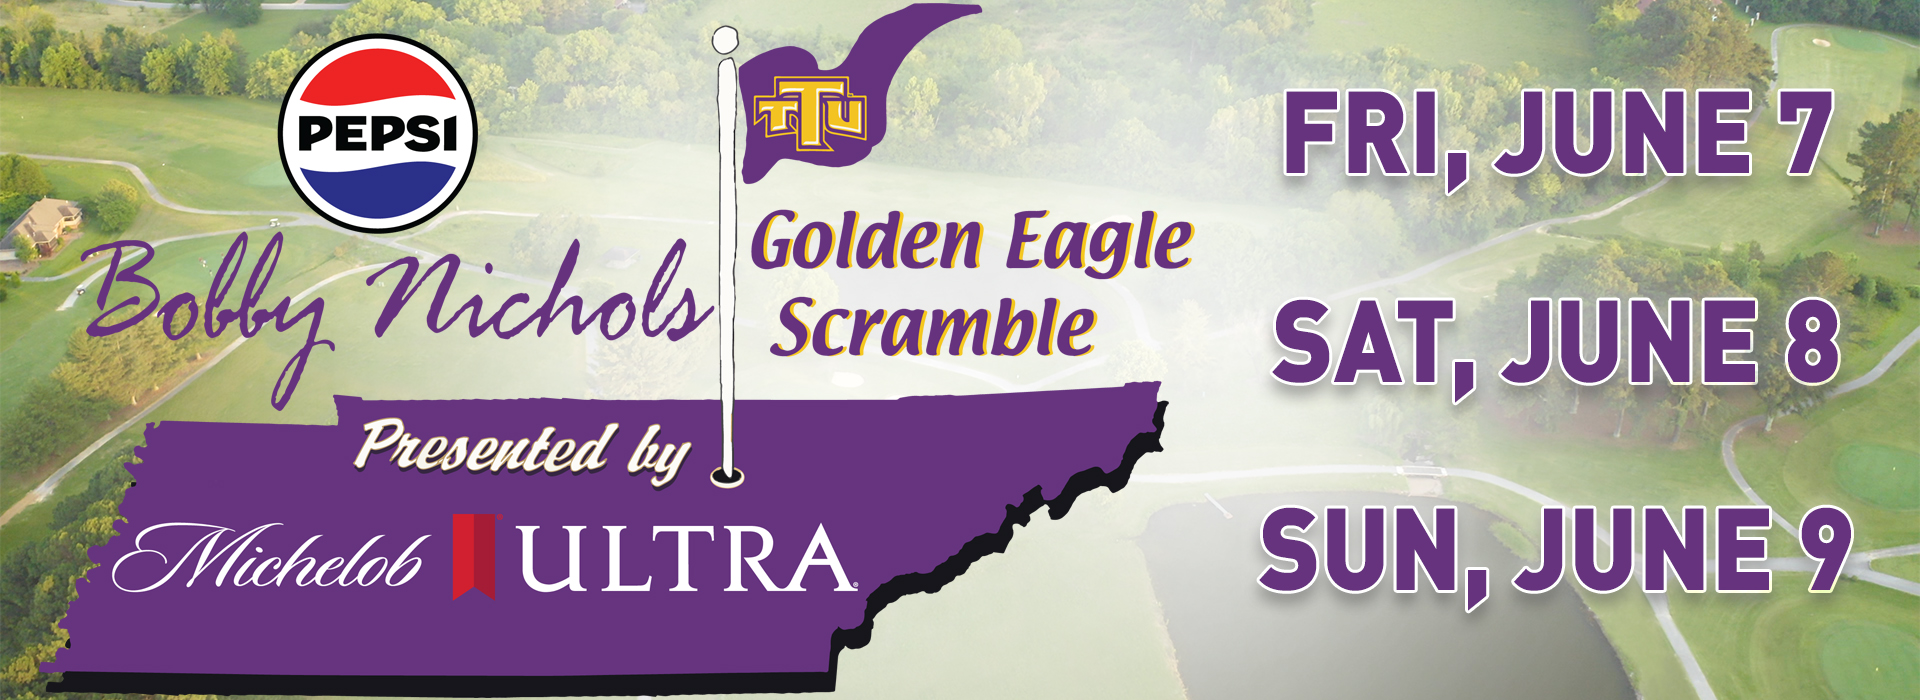 Save the date – Pepsi Golden Eagle Scramble presented by Michelob Ultra set for June 7-9